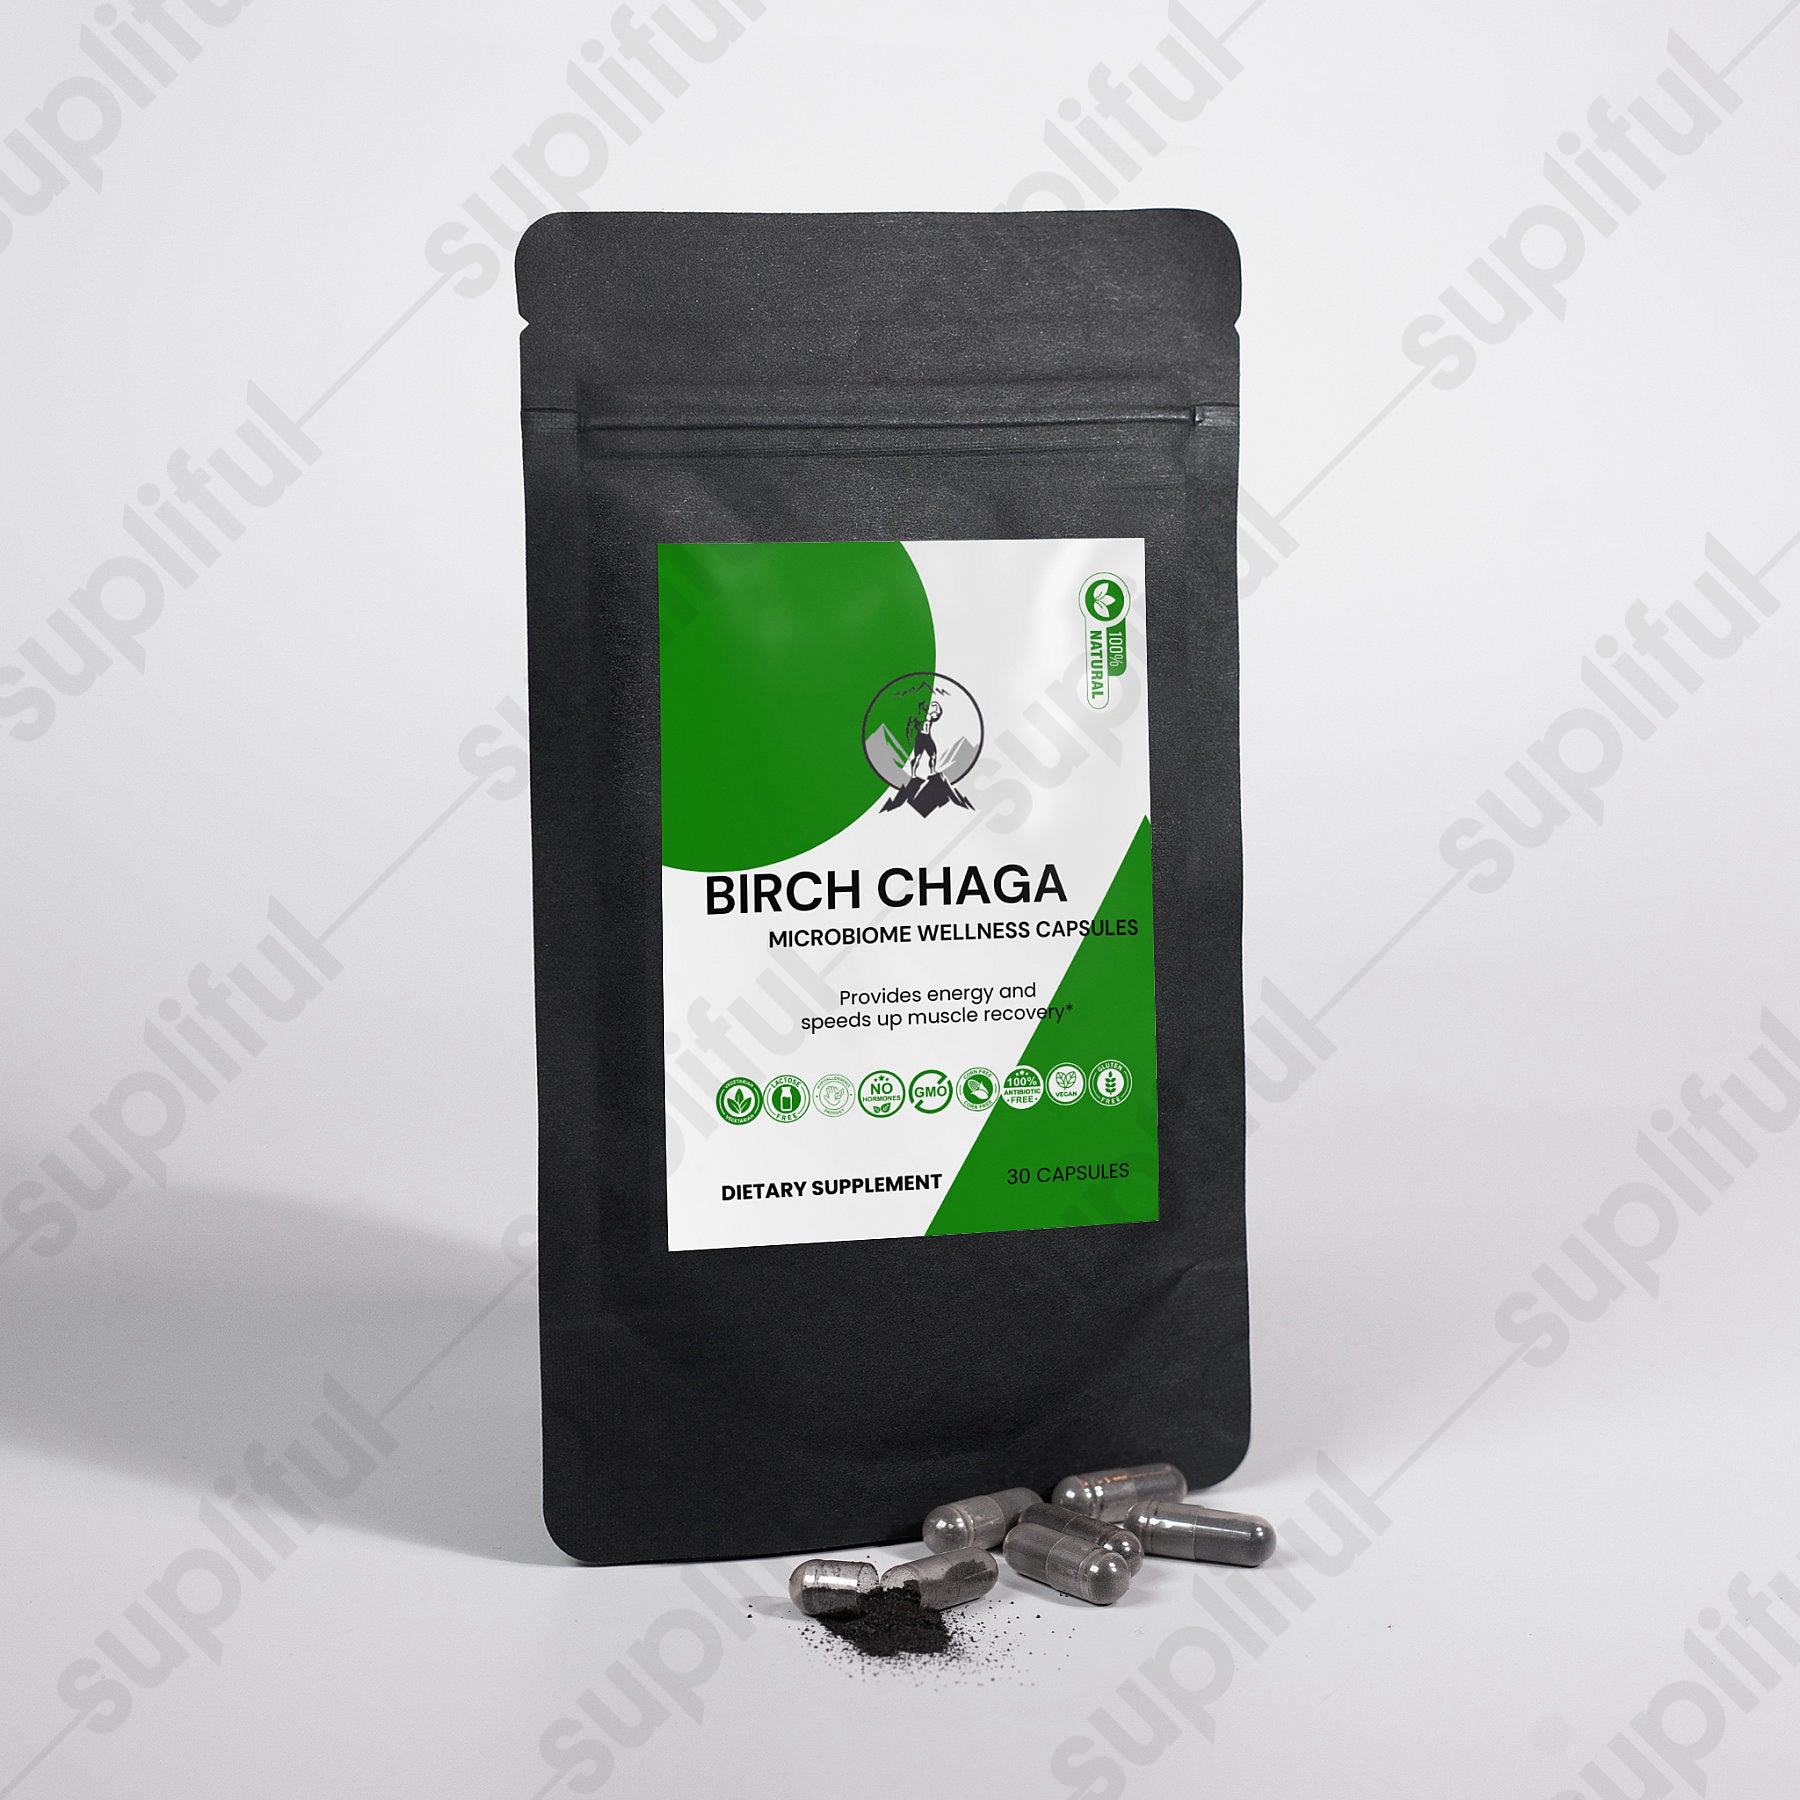 Birch Chaga Microbiome Wellness CapsulesNatural ExtractsBirch Chaga Capsules are loaded with essential nutrients for optimized body functioning. The most notable of these nutrients are phytochemicals.Phytochemicals are plBirch Chaga Microbiome Wellness CapsulesThe Rocky Ranger